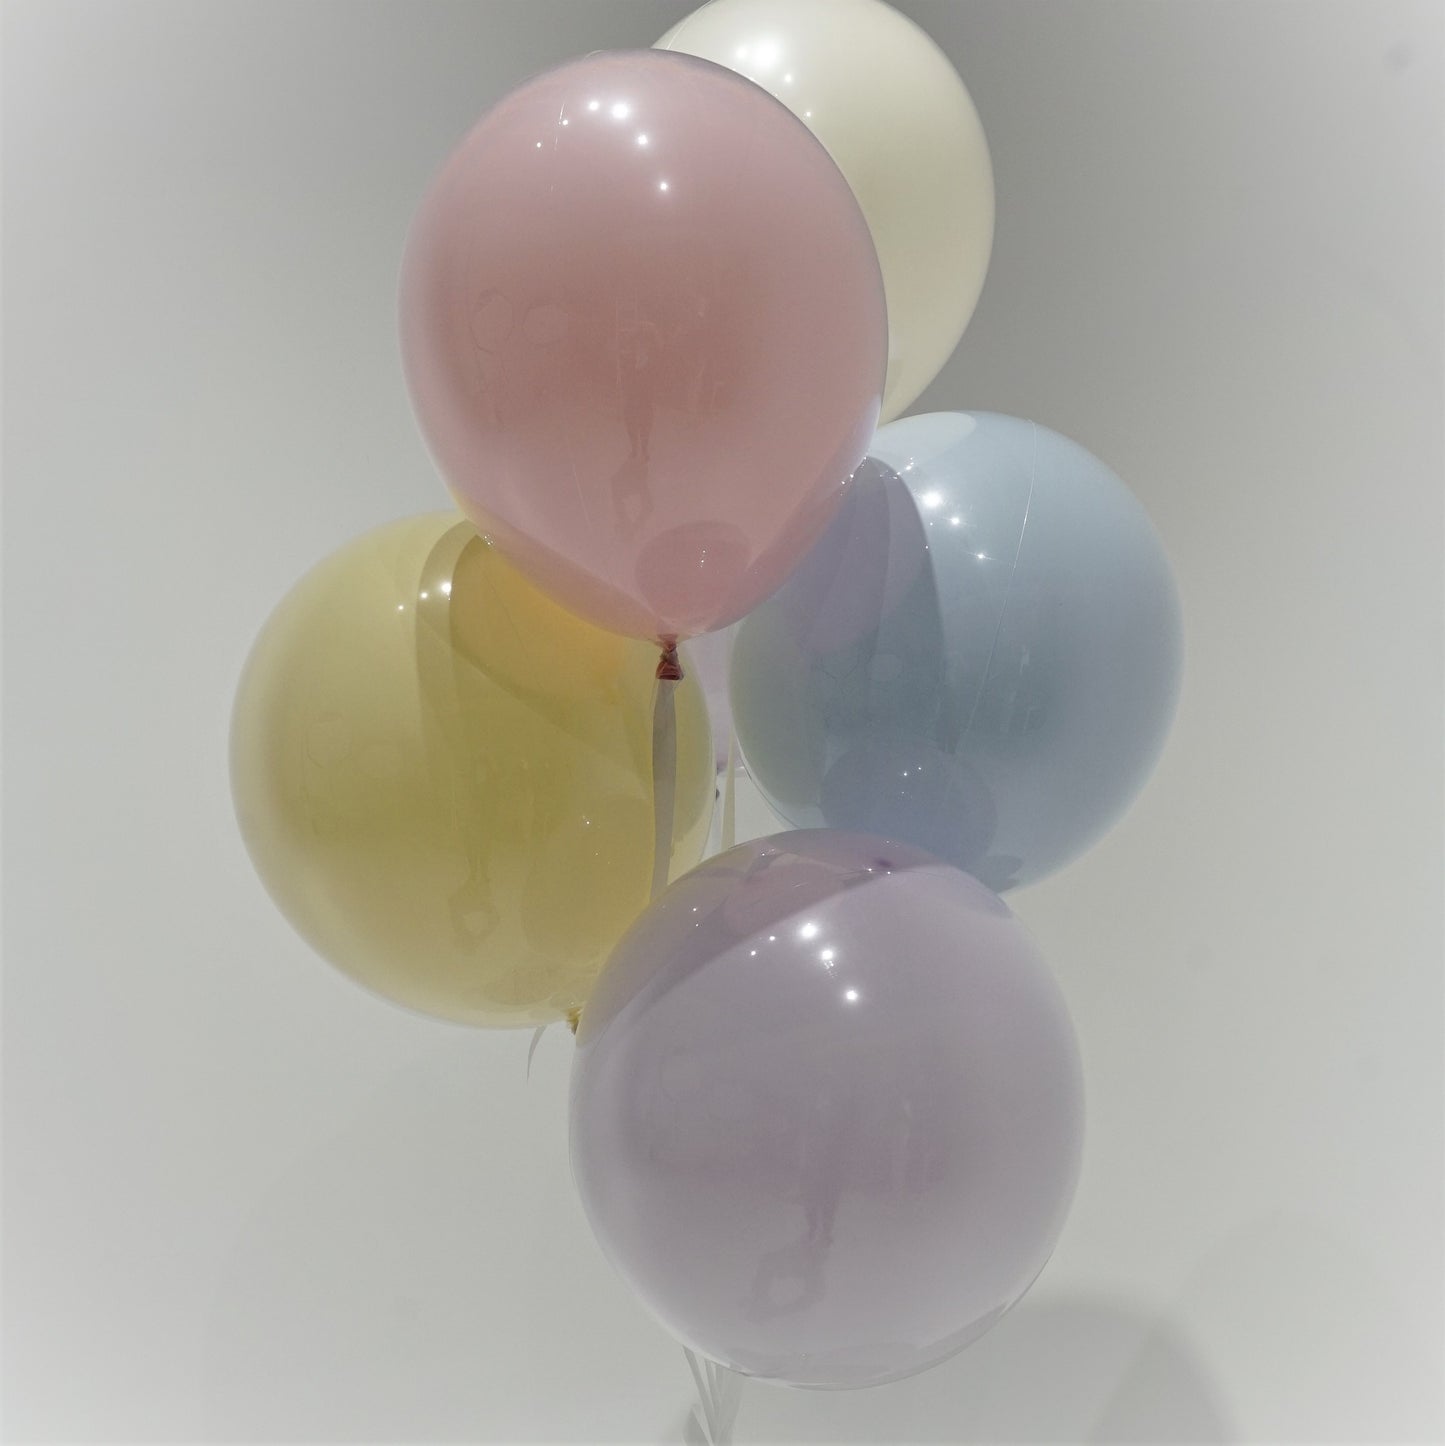 Extra Special Balloons